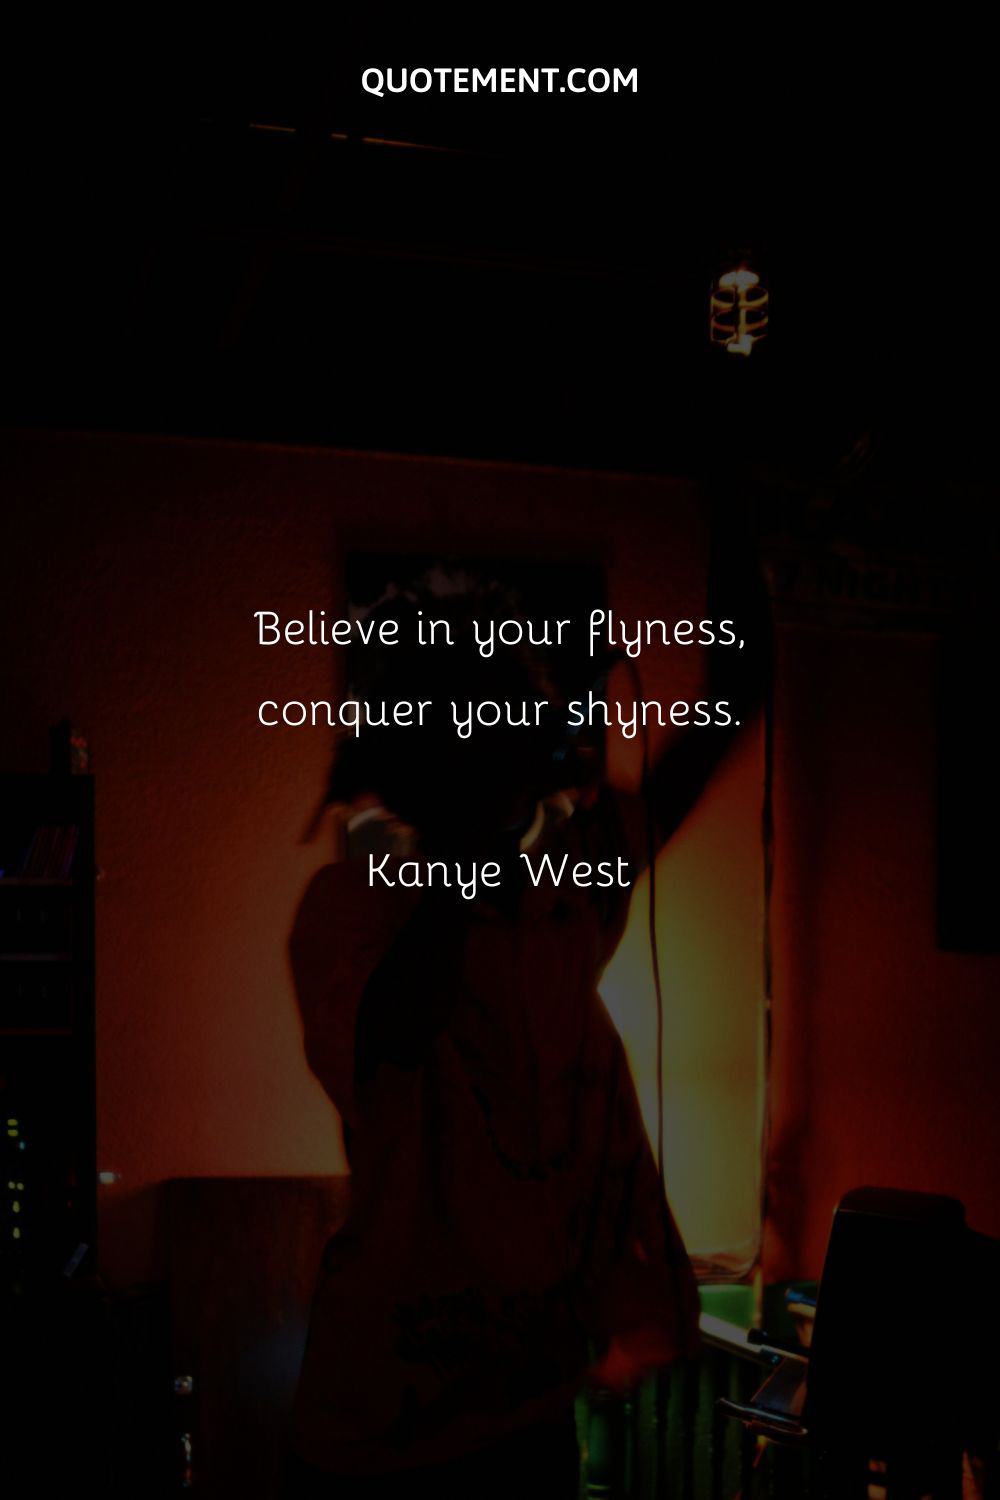 Believe in your flyness, conquer your shyness